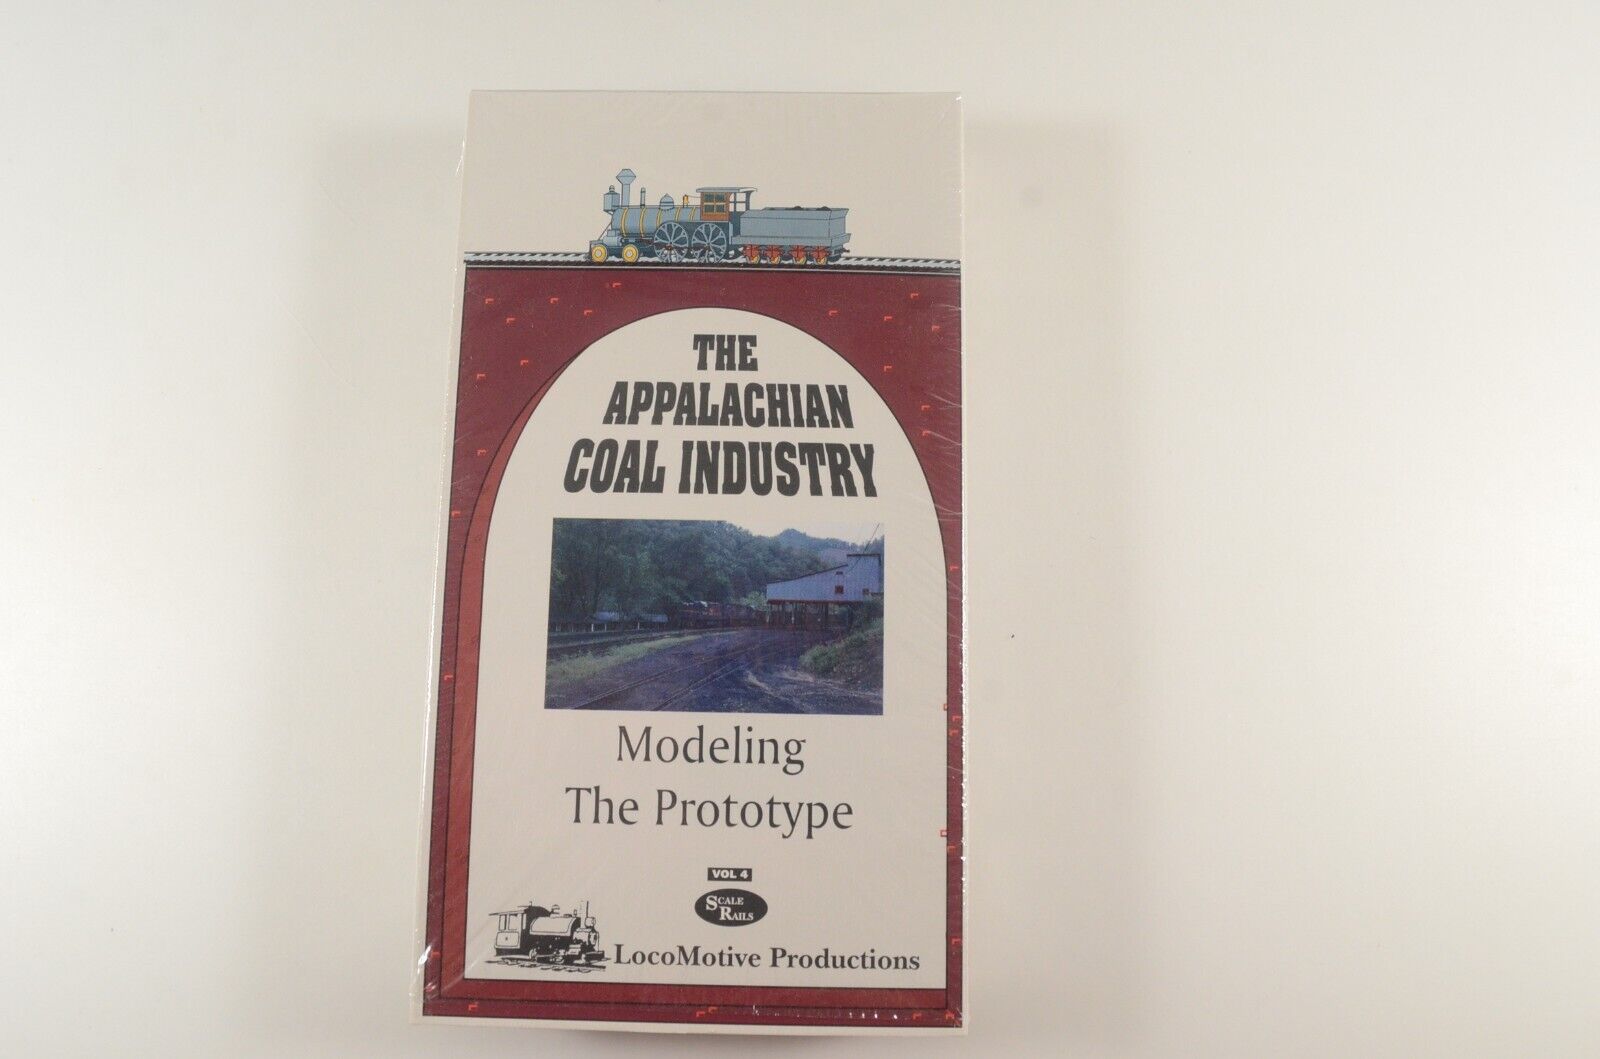 Scale Rails Volume 4 - The Appalachian Coal Industry Modeling the Prototype VHS